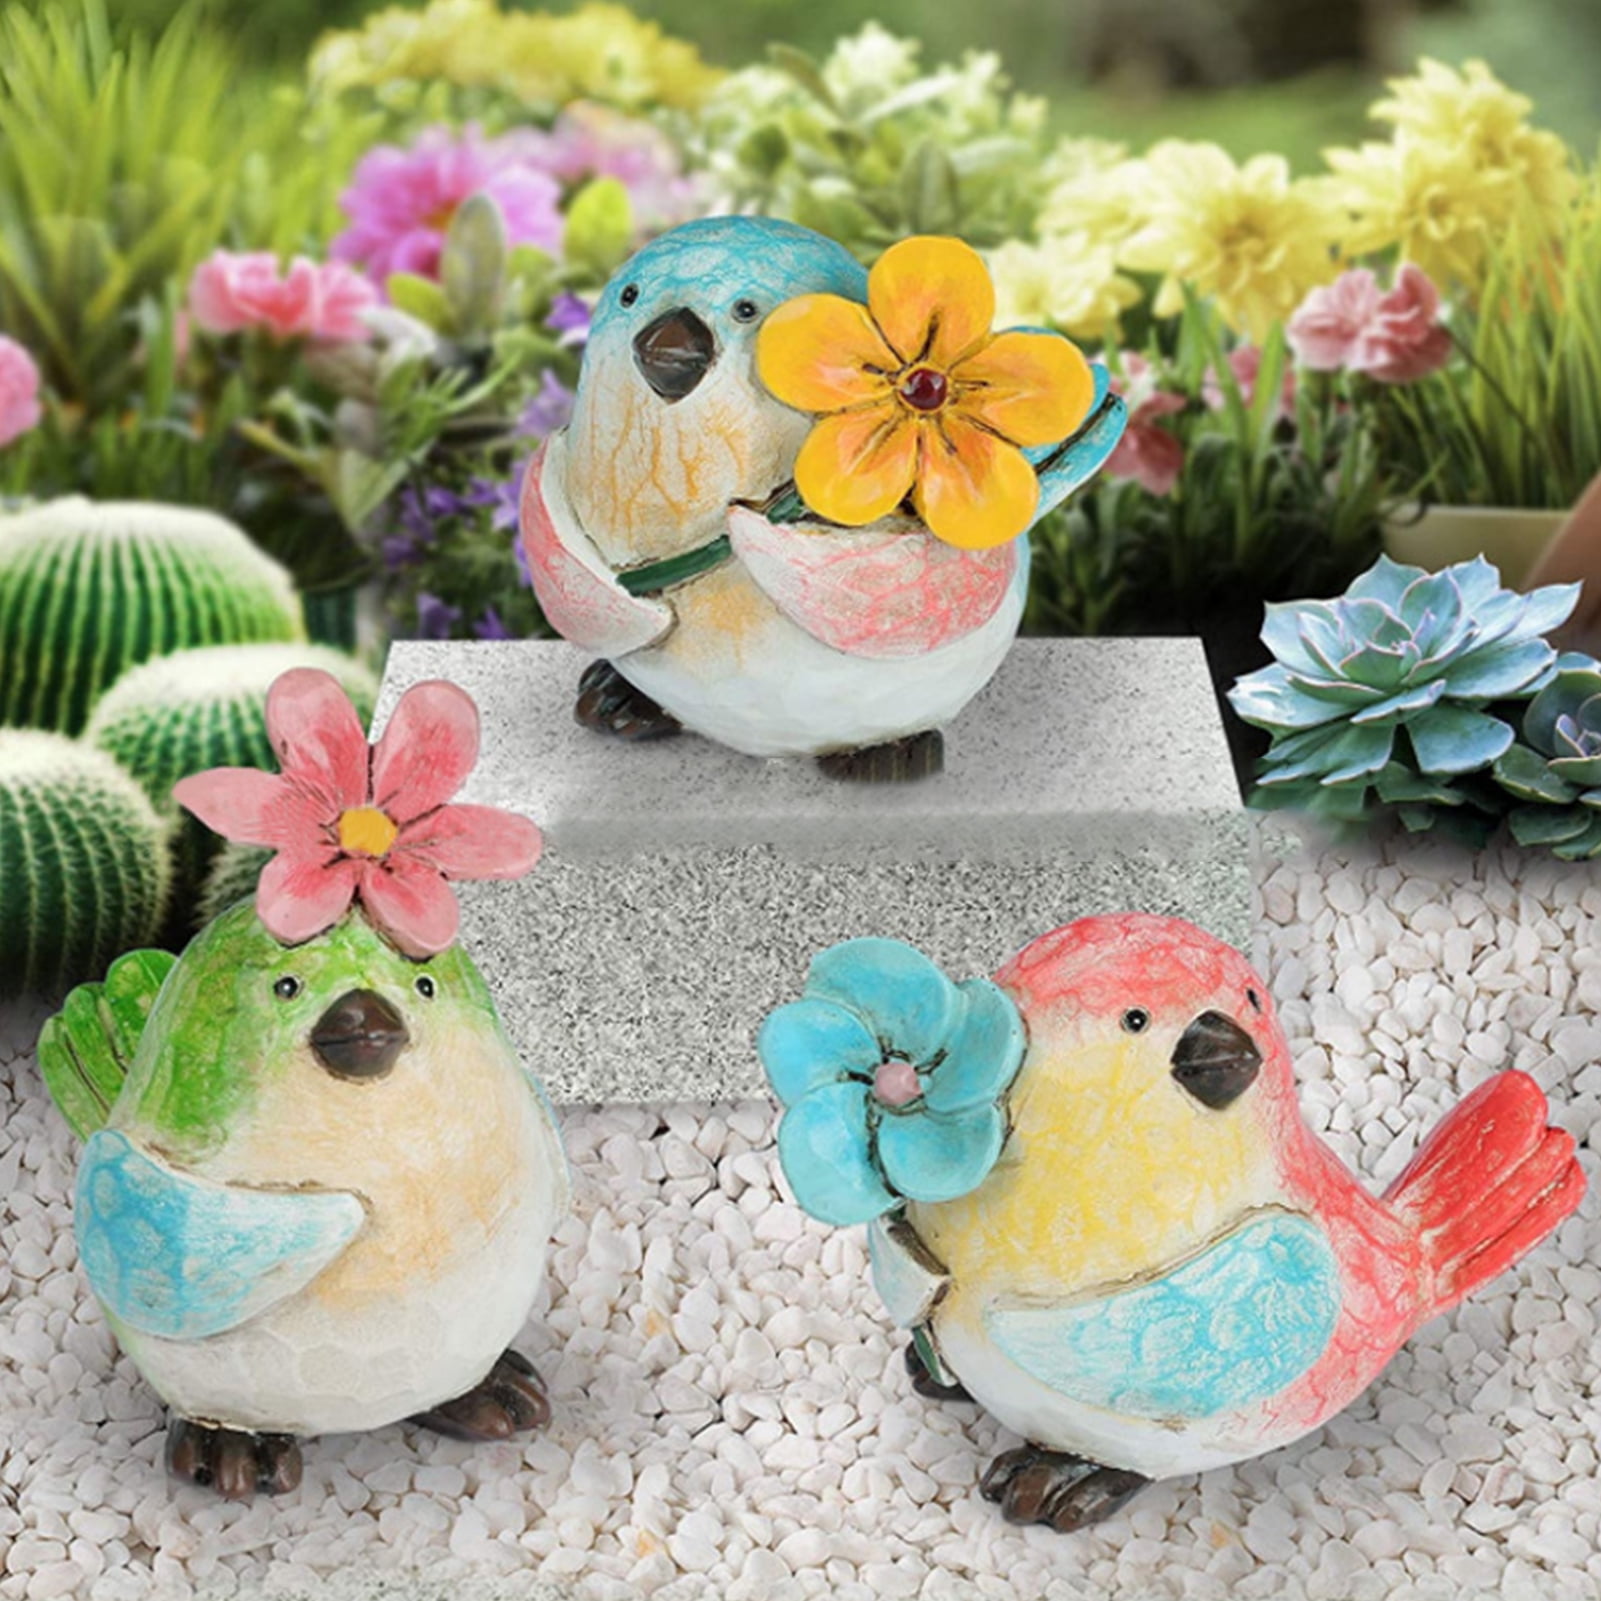 LSLJS Easter Birds Ornaments, Easter Decorations, 3D Bird Figurines Cute  Floral Plush Birds Doll, Inseparable Birds Spring Table Decor Animals  Garden Statue Party Favors Gifts for Windows Home Office 